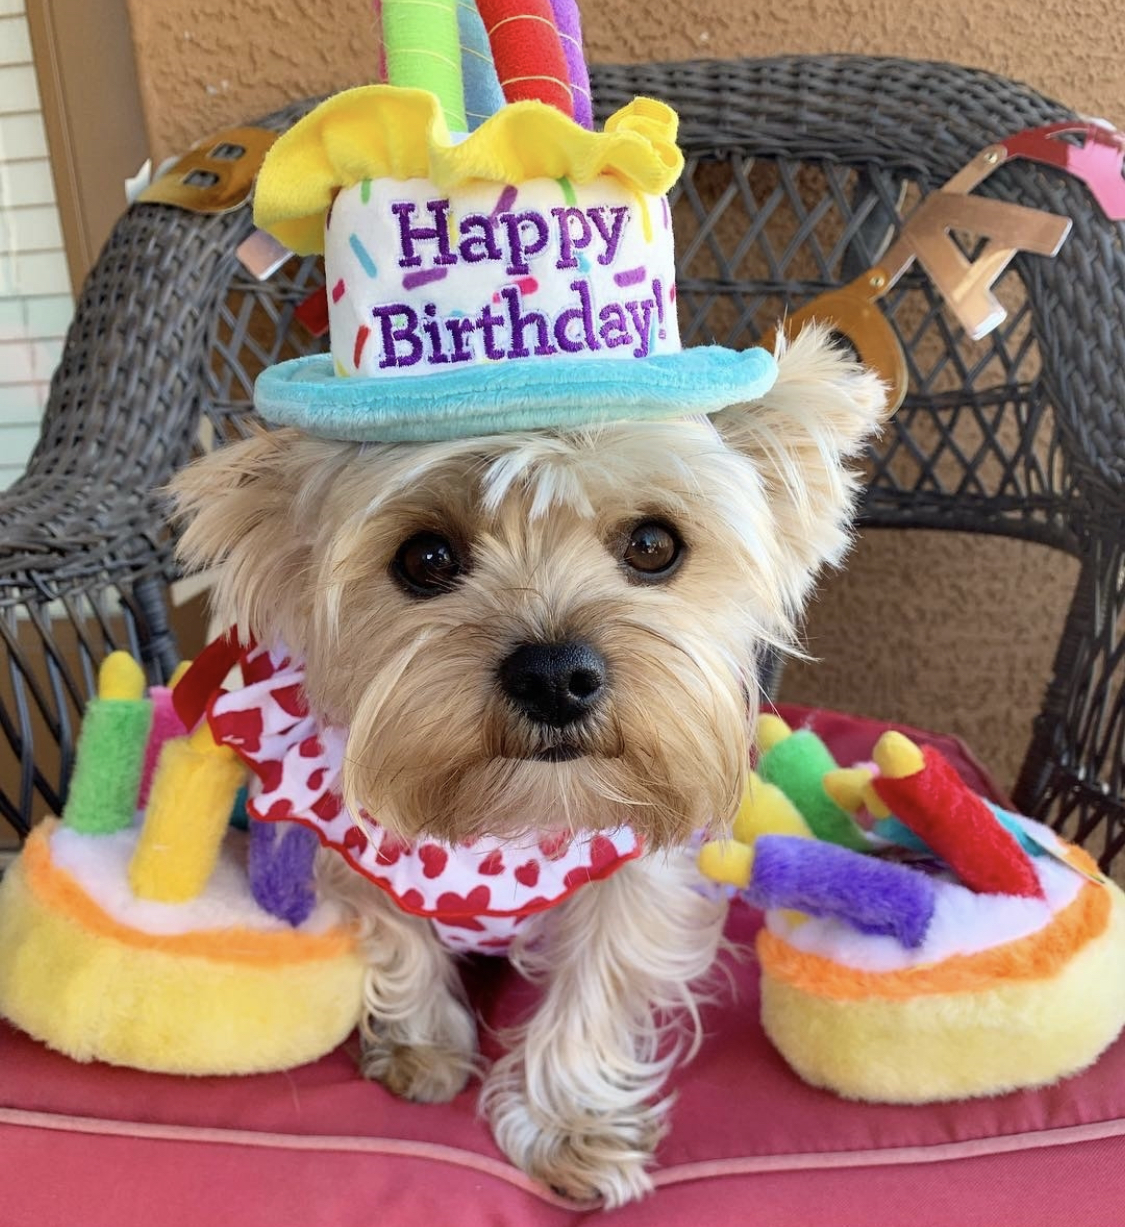 Yorkshire Terrier wearing a birthday cake hat with cake stuffed toys on the chair 